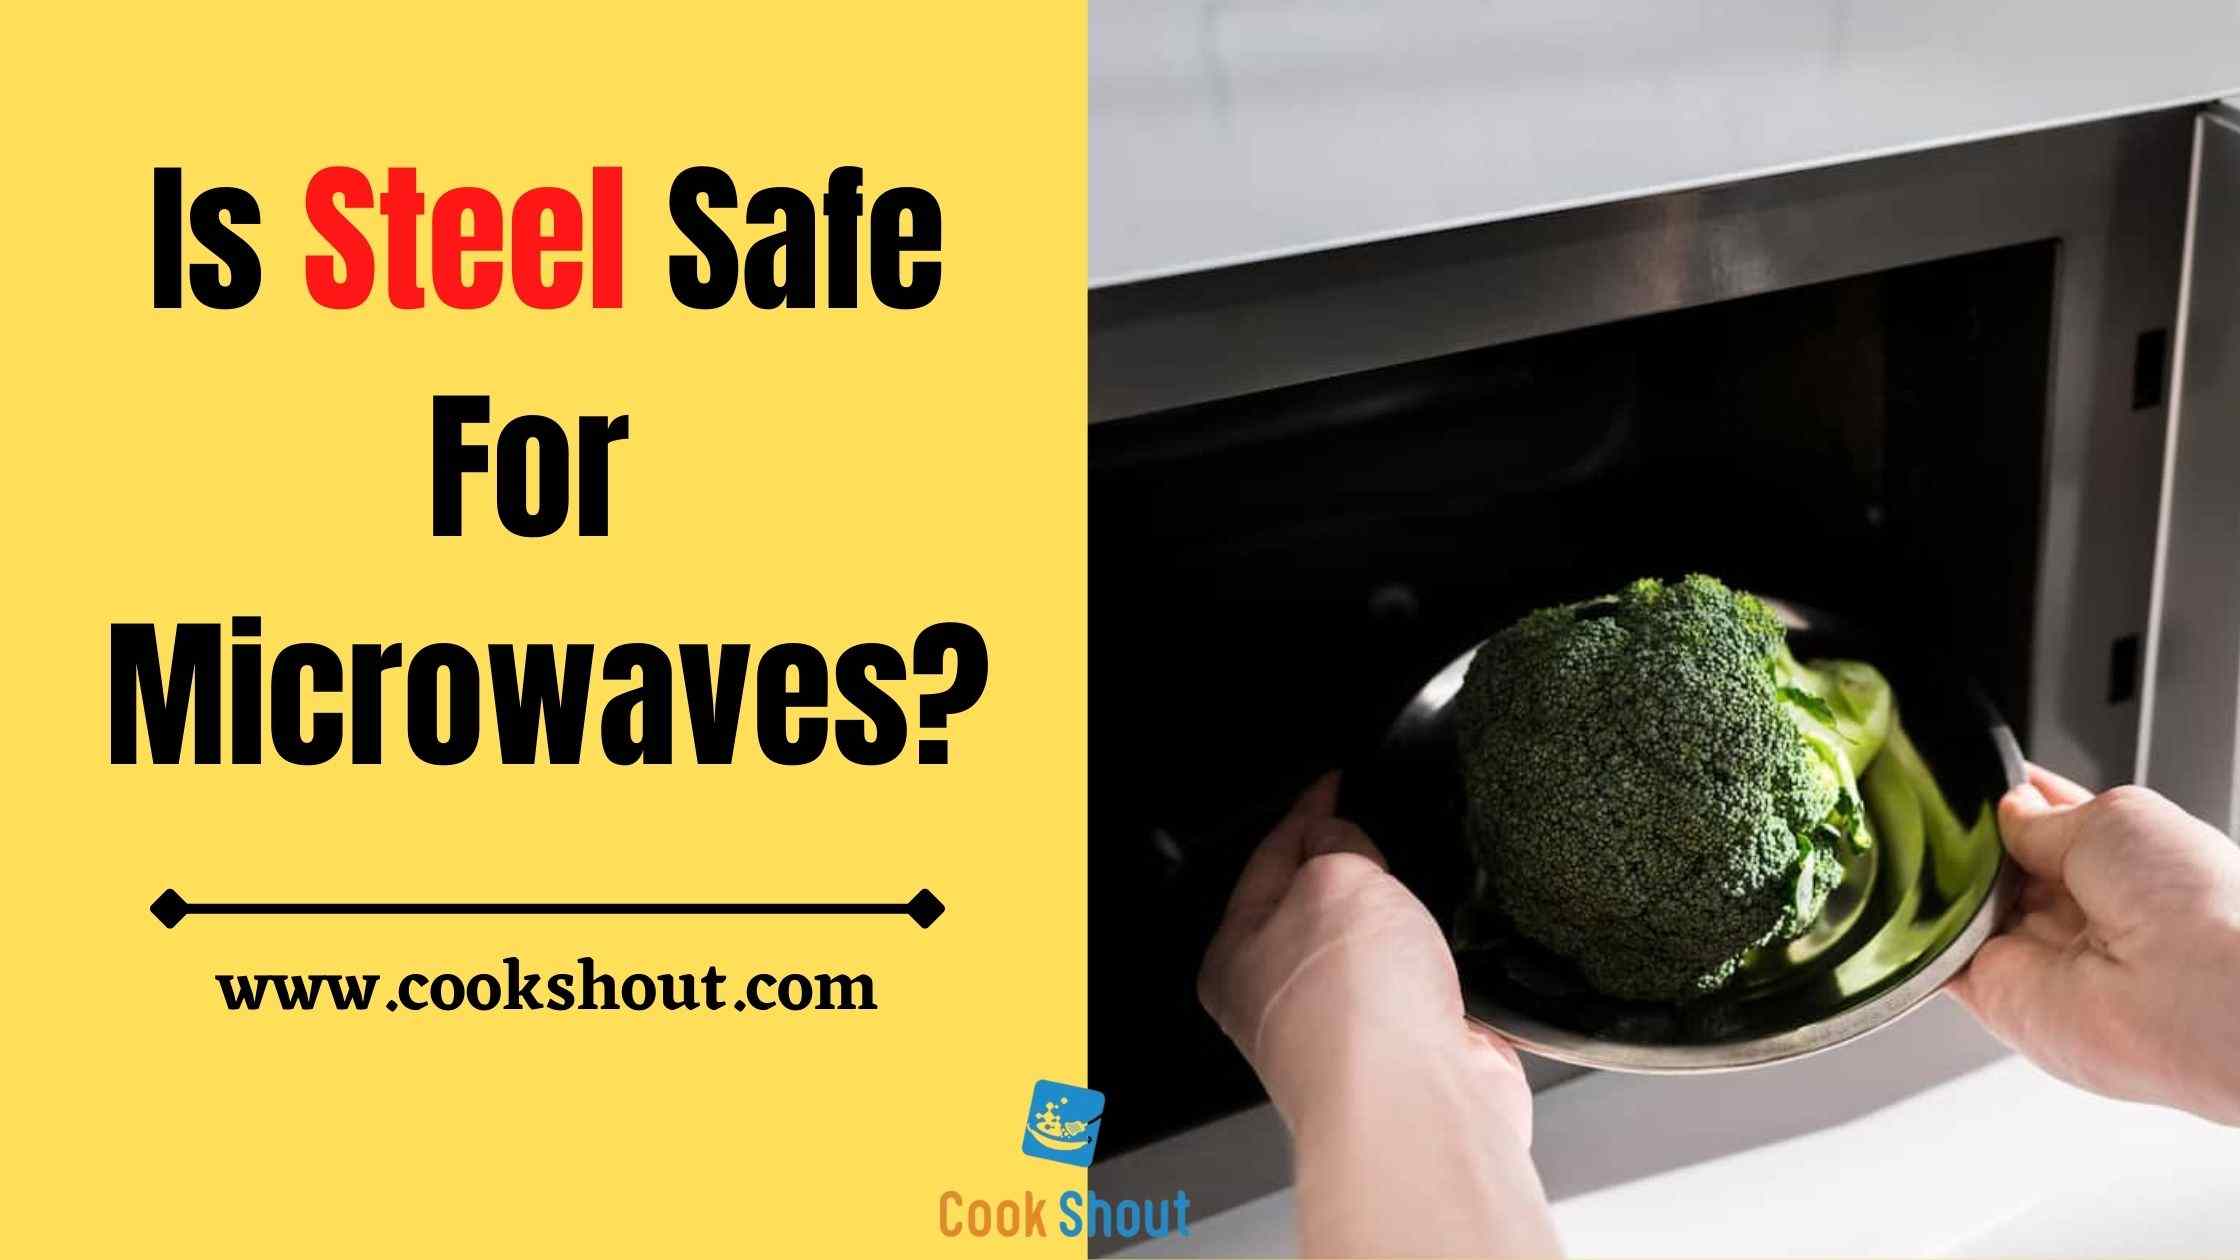 Is Steel Safe For Microwaves?